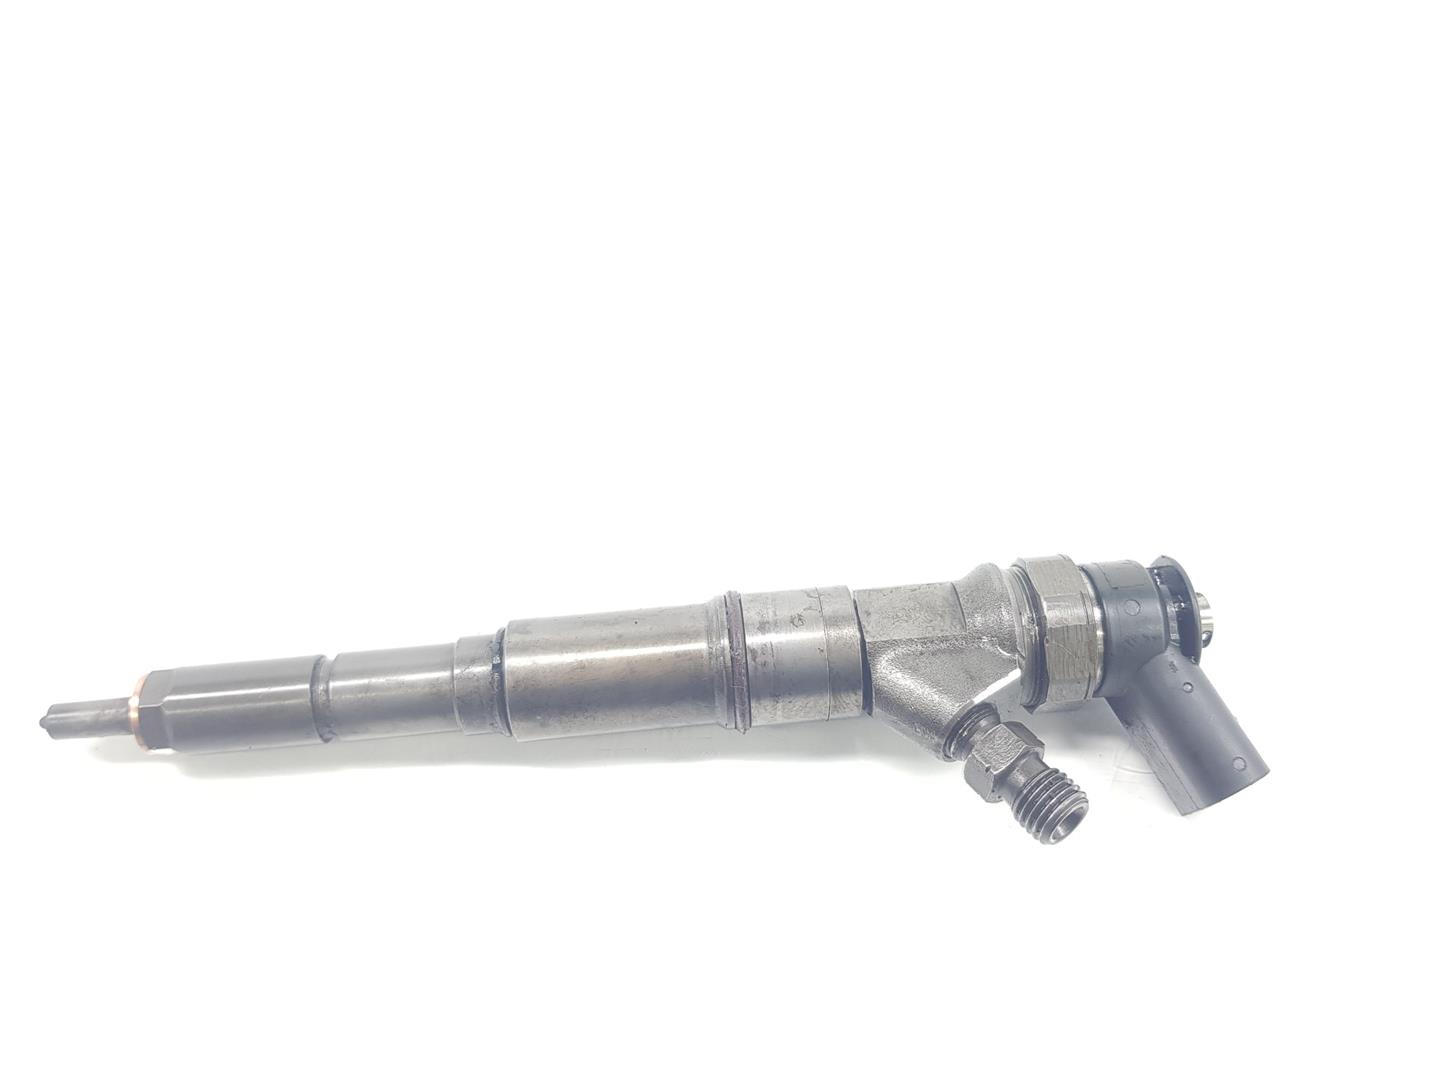 BMW 3 Series E46 (1997-2006) Fuel Injector 13537793836, 13537793836, 1111AA 22963222